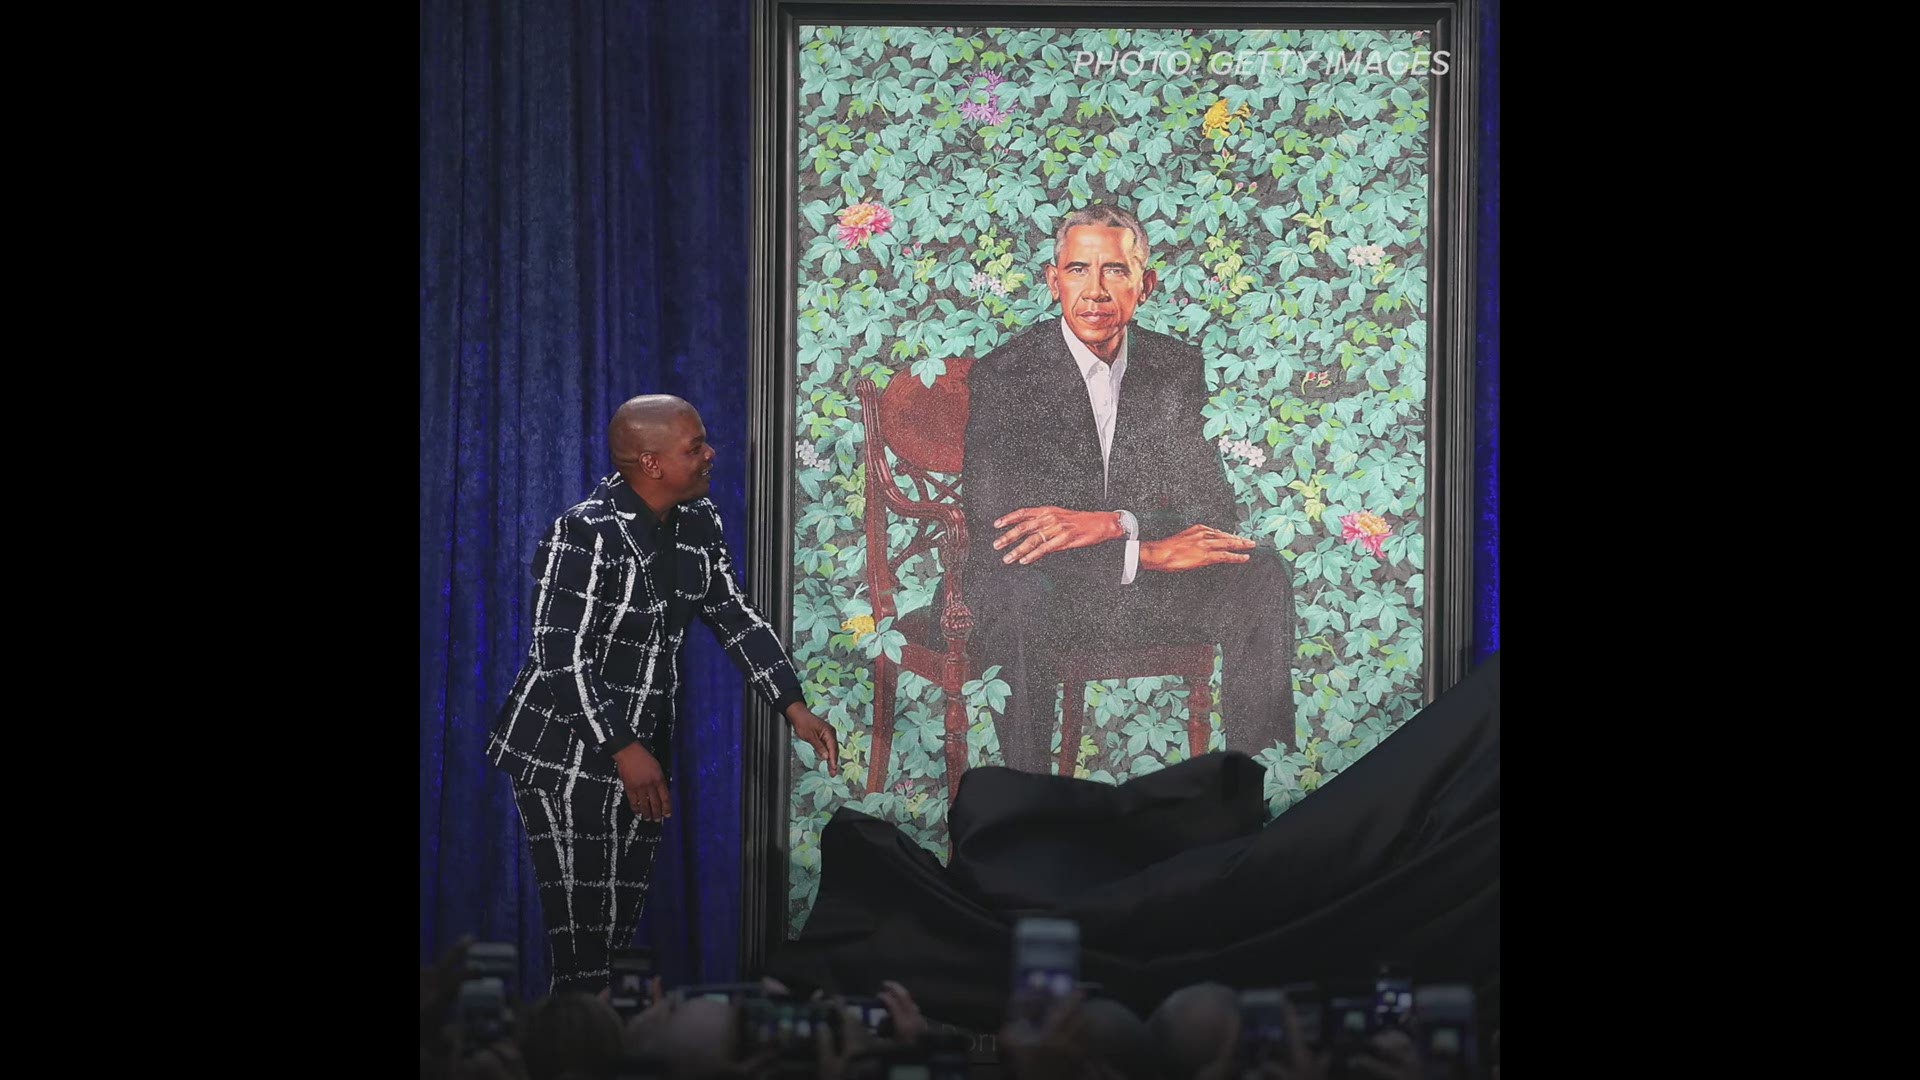 Portraits of the former president and First Lady were unveiled Monday at the Smithsonian. WFAA.com